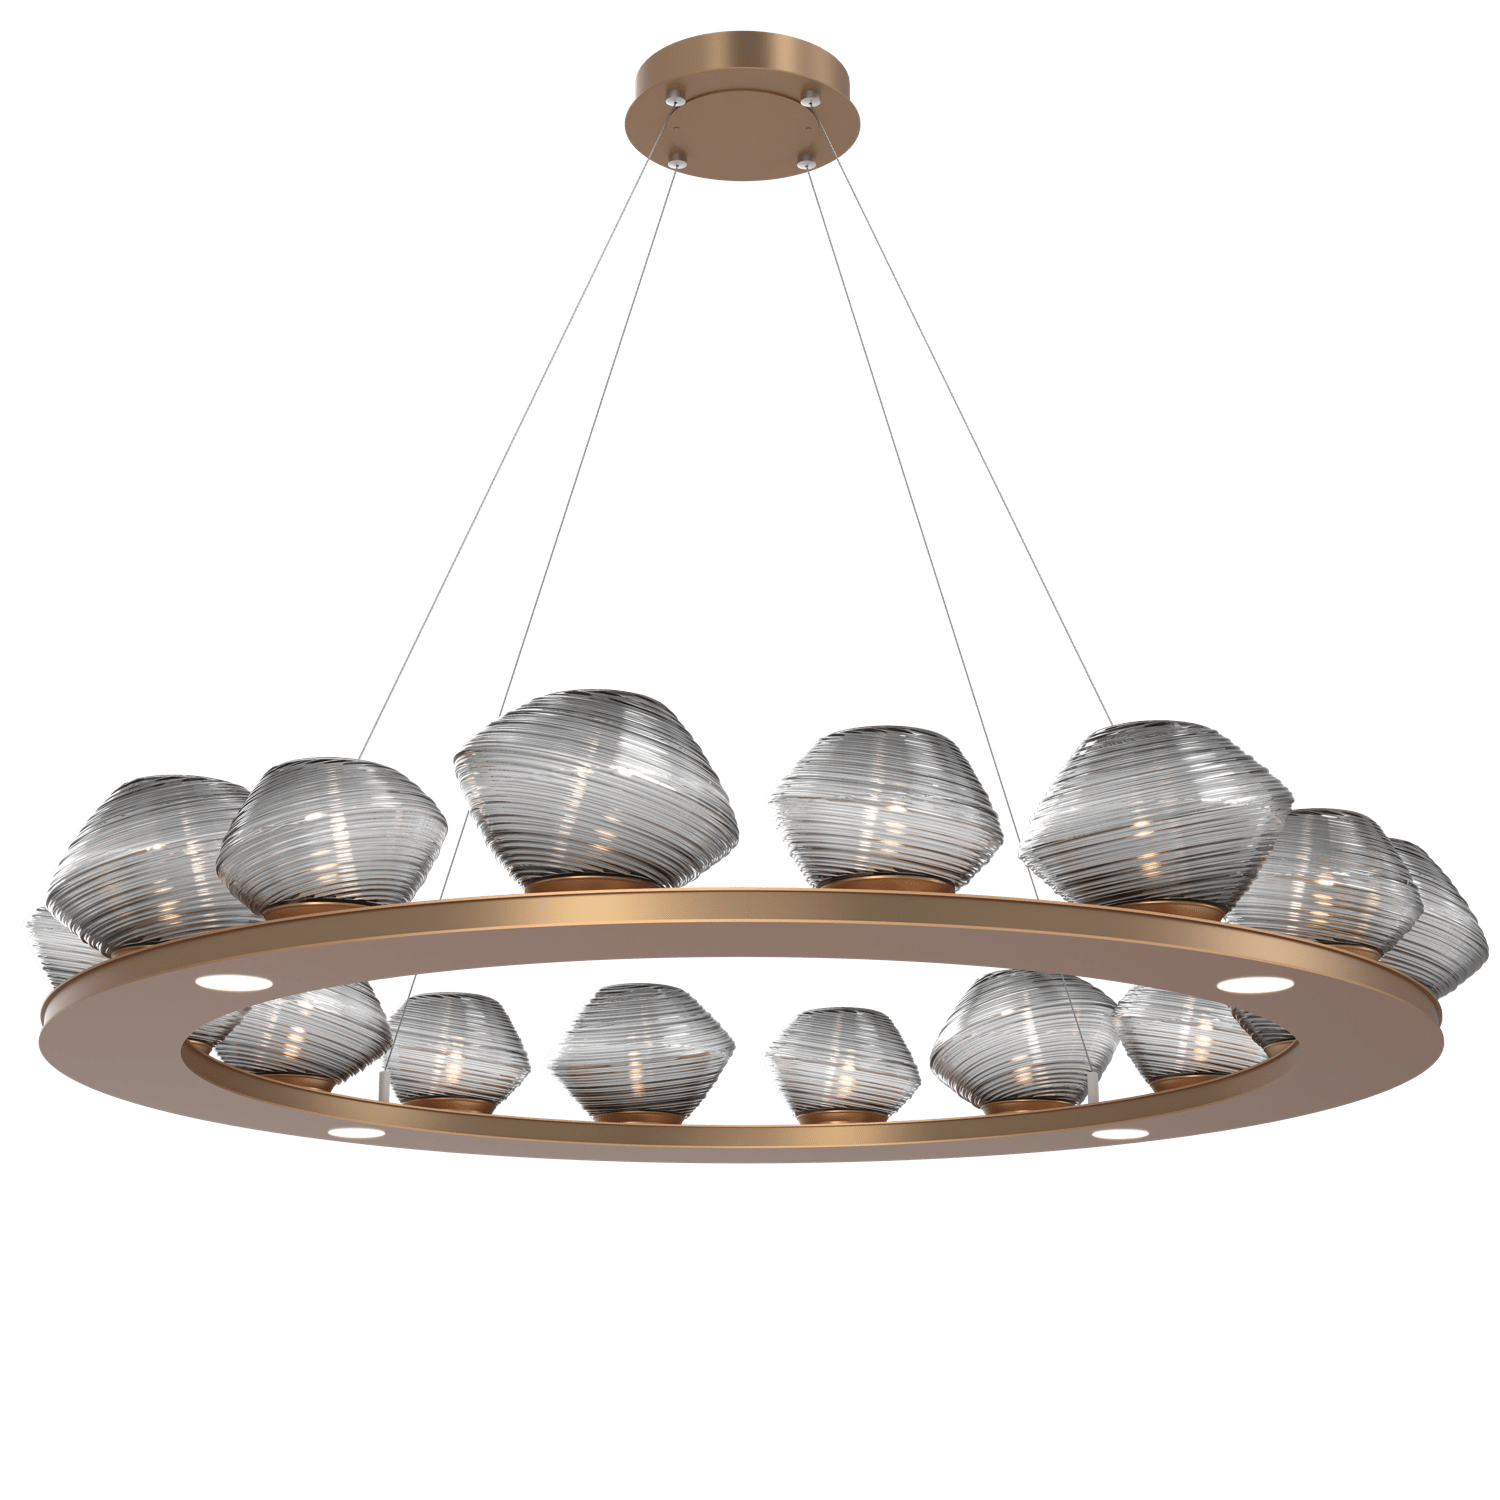 CHB0089-0D-NB-S-Hammerton-Studio-Mesa-48-inch-ring-chandelier-with-novel-brass-finish-and-smoke-blown-glass-shades-and-LED-lamping